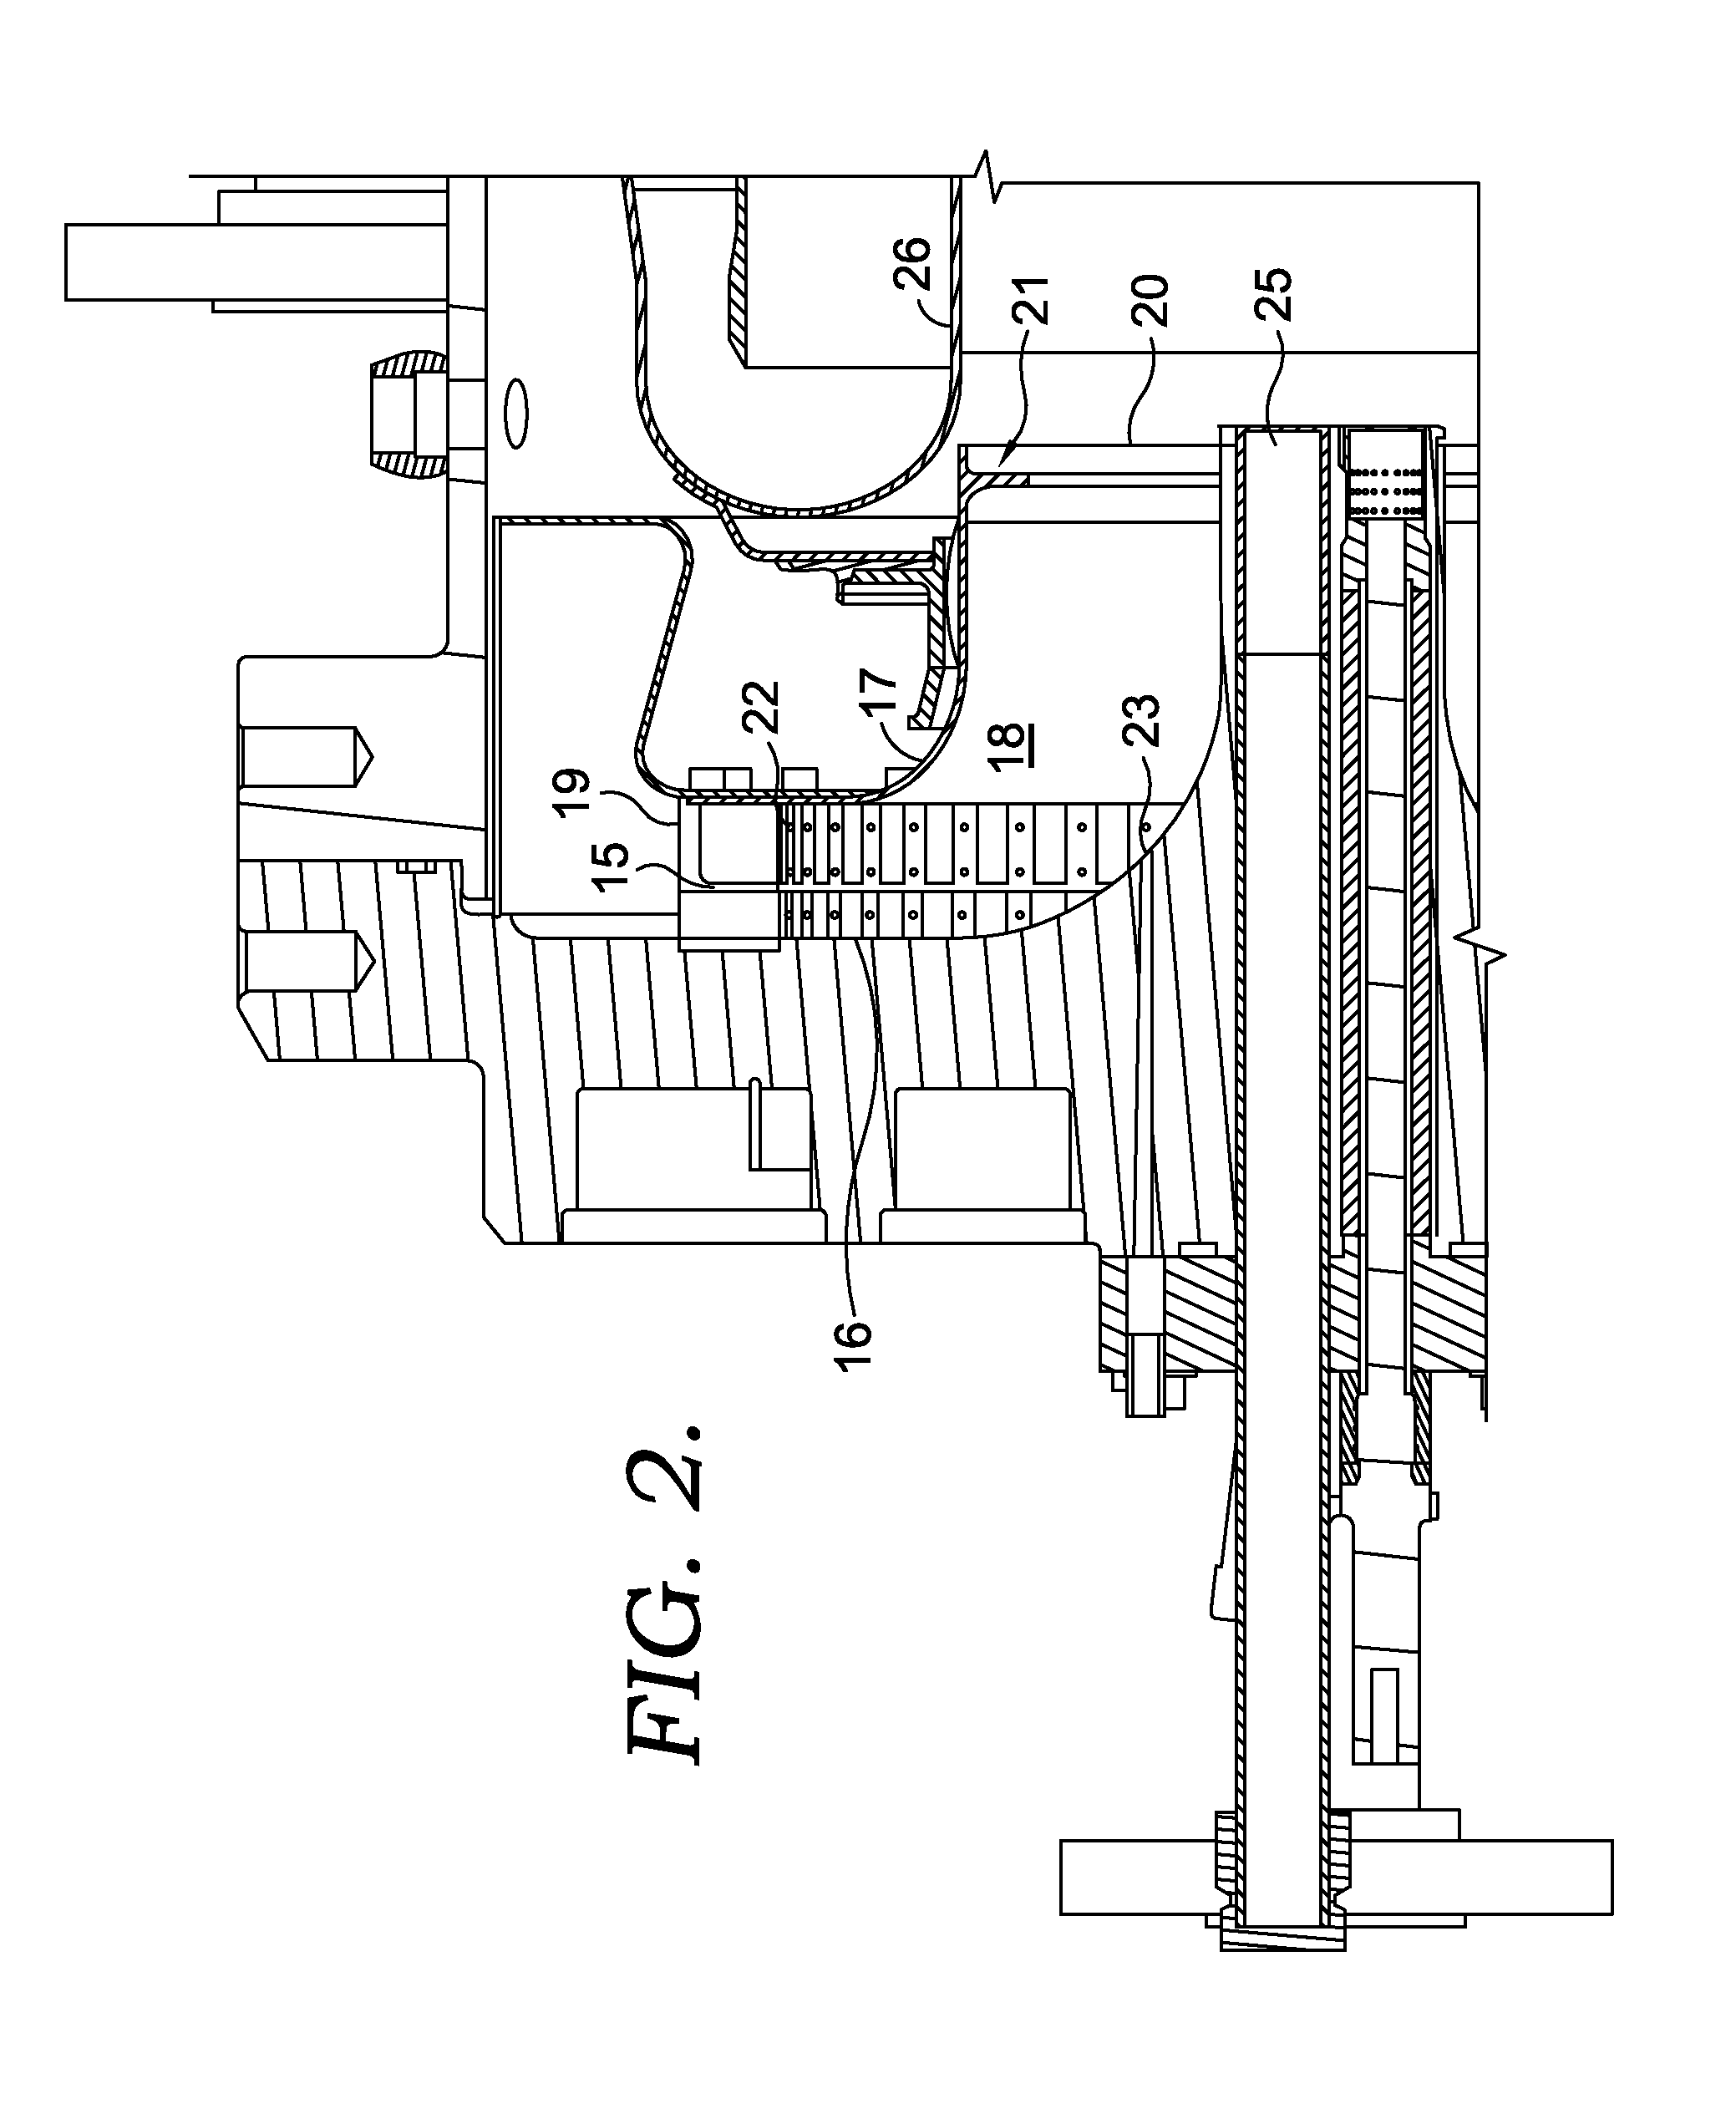 Apparatus and method for reducing carbon monoxide emissions